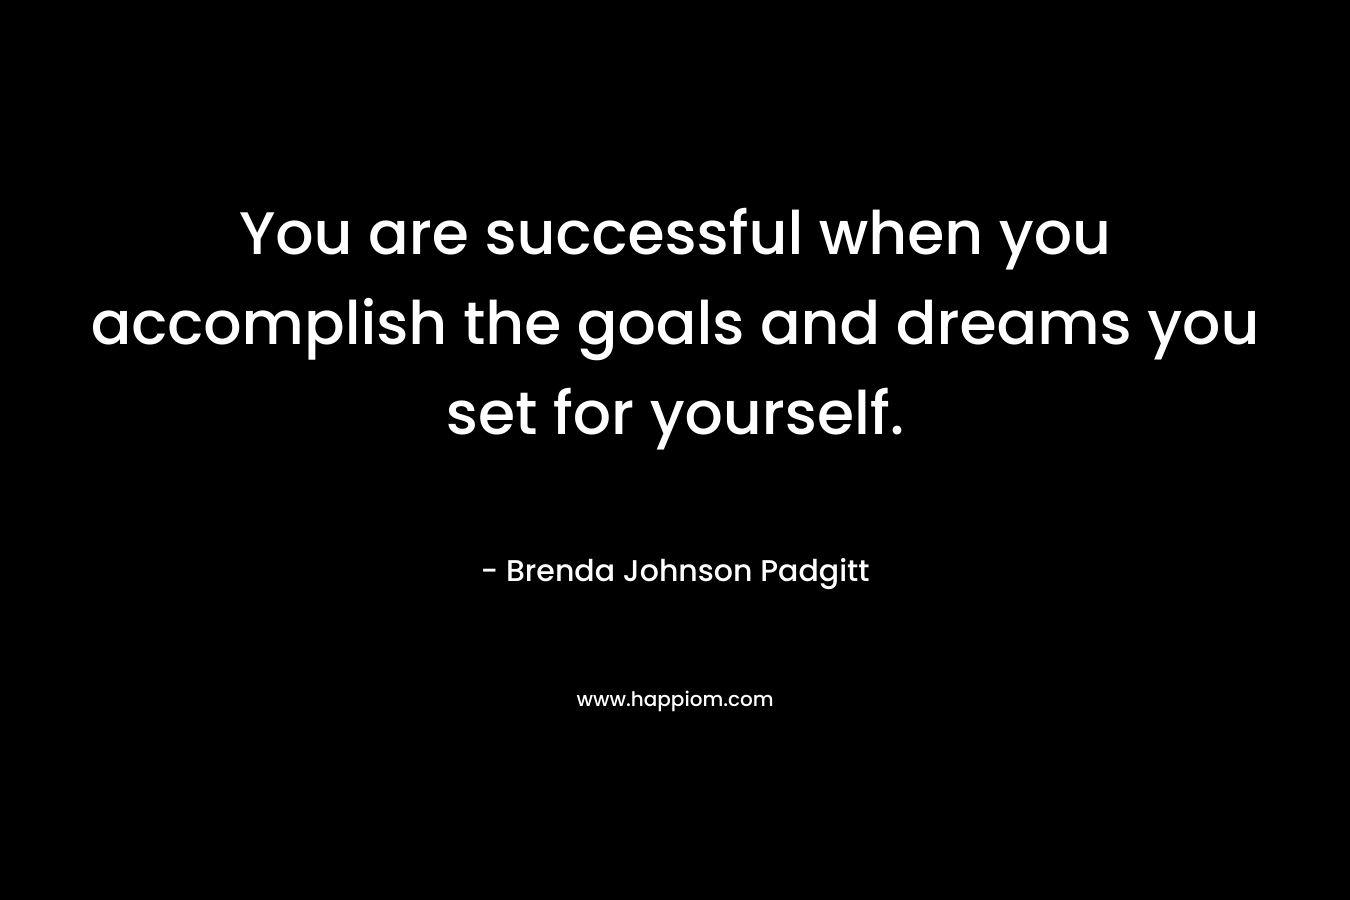 You are successful when you accomplish the goals and dreams you set for yourself.